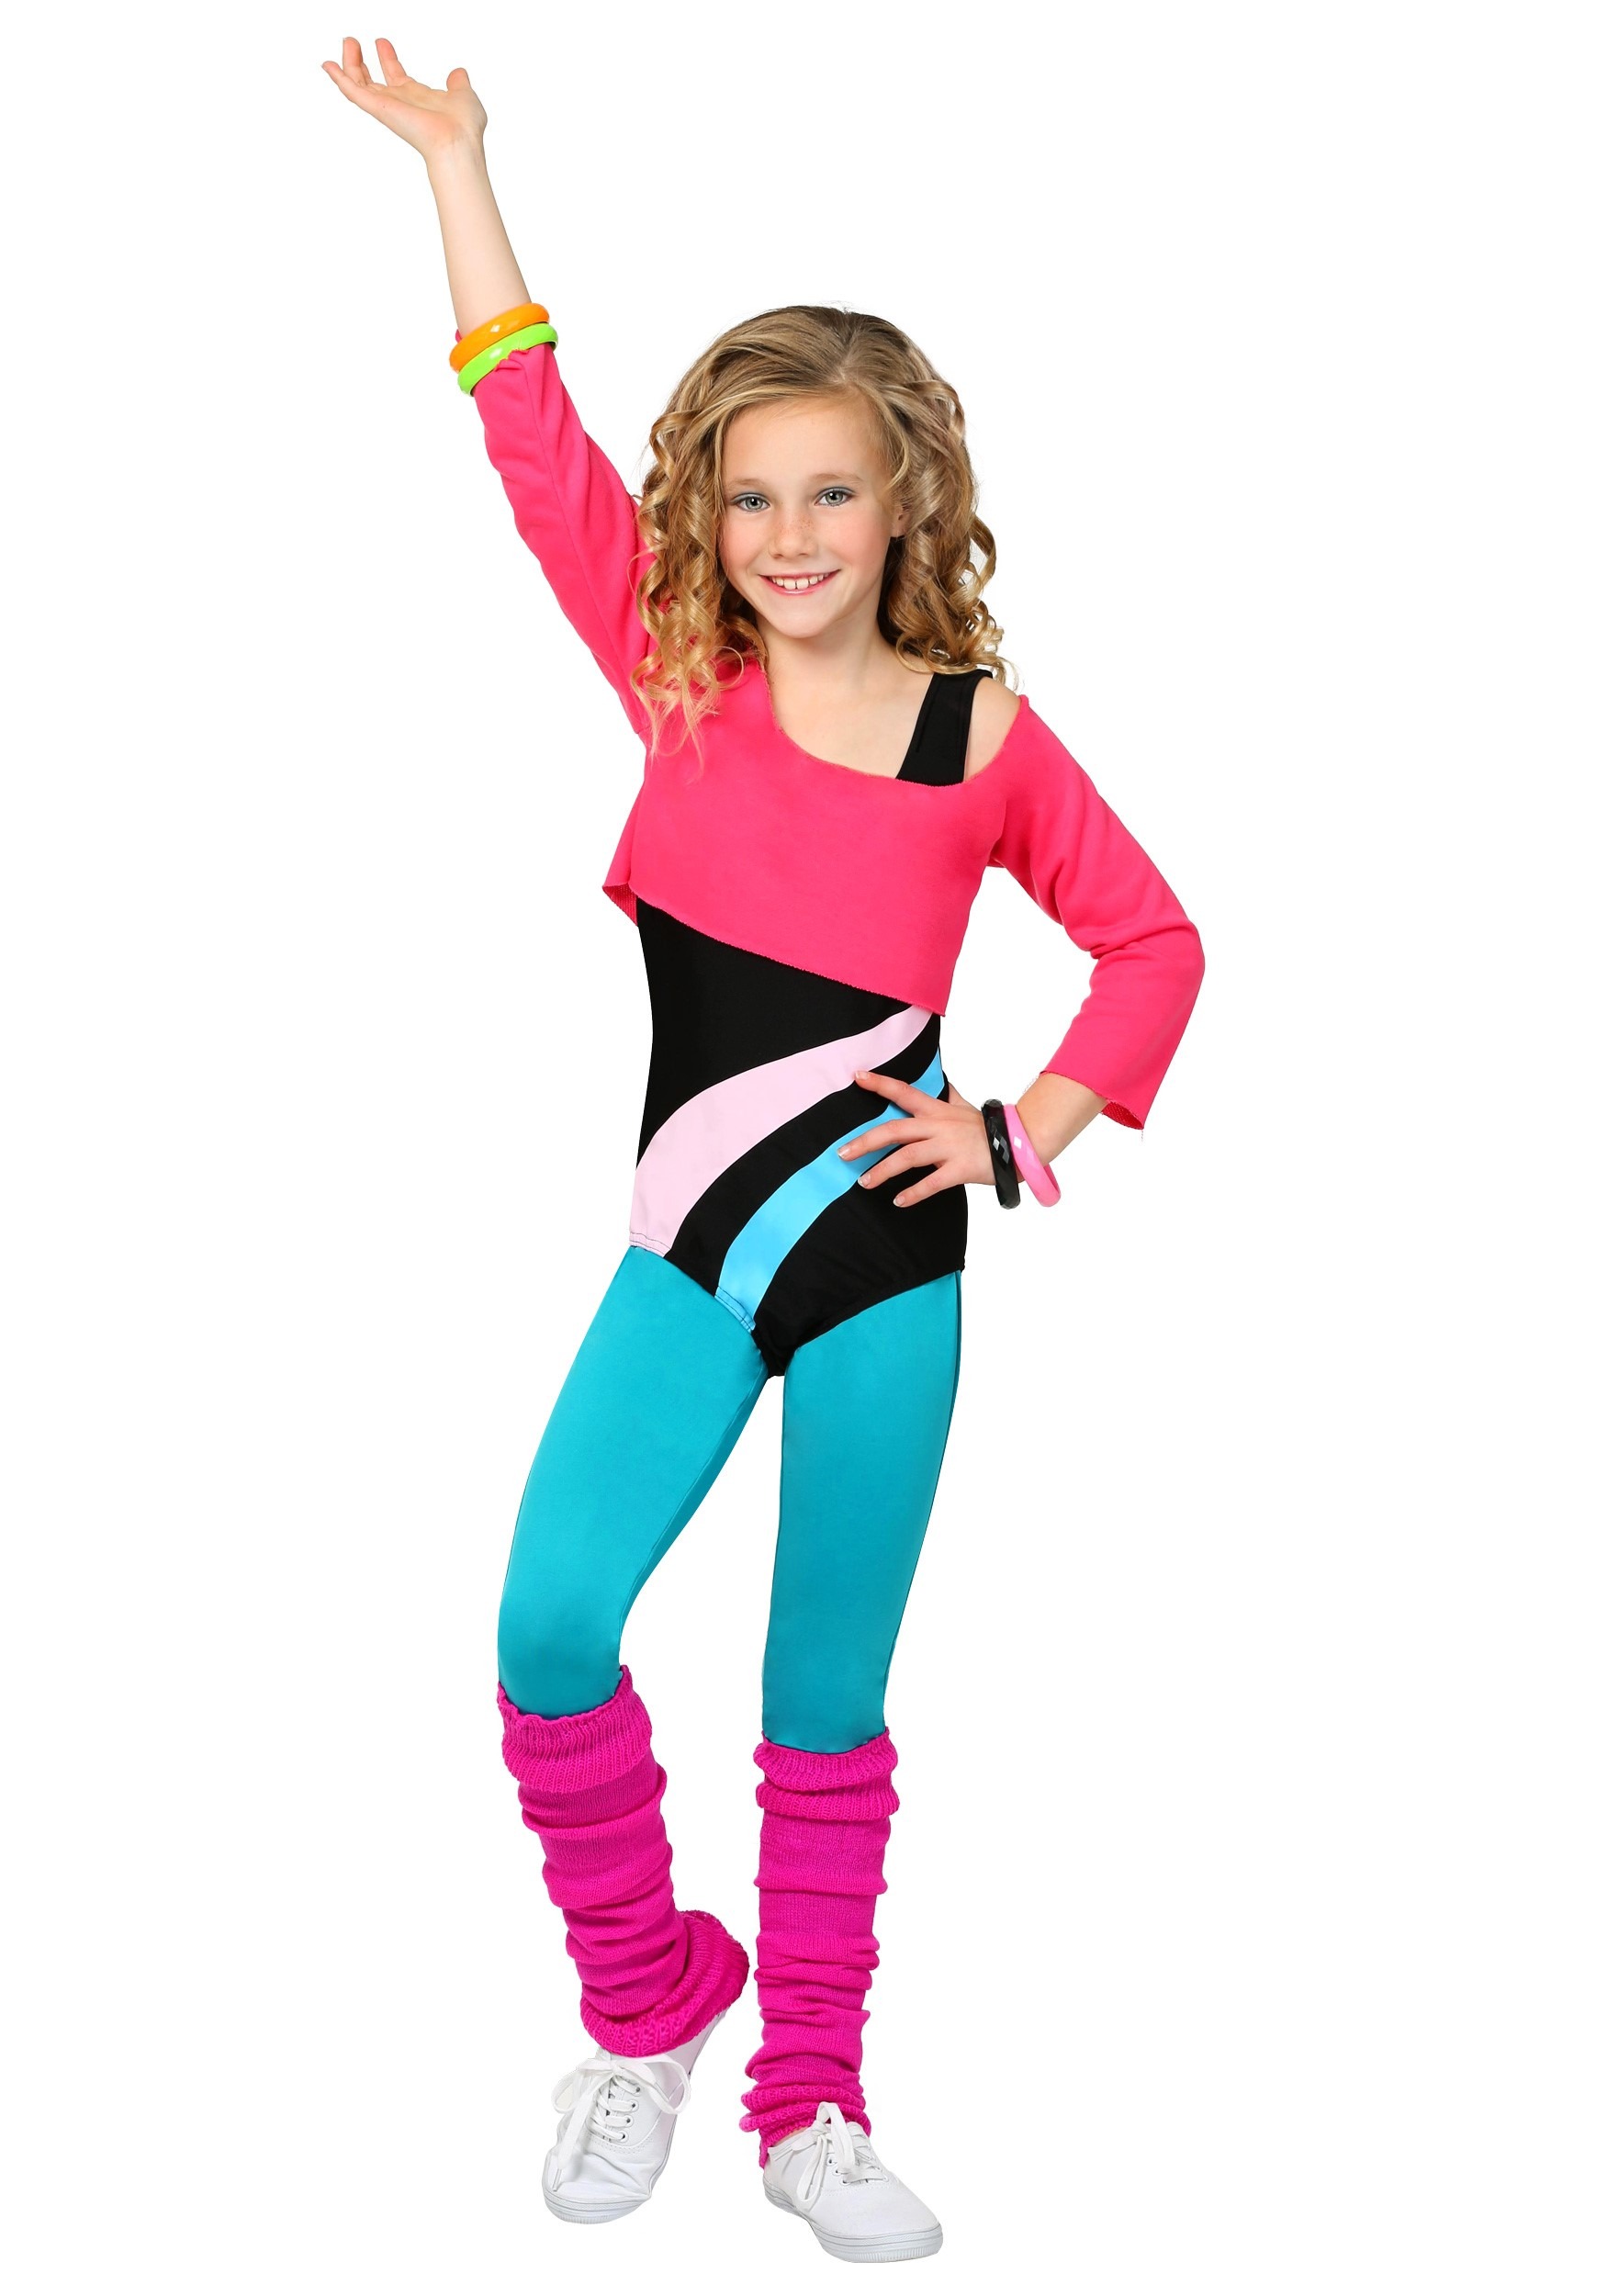 10 Minute Easy workout costumes for Beginner